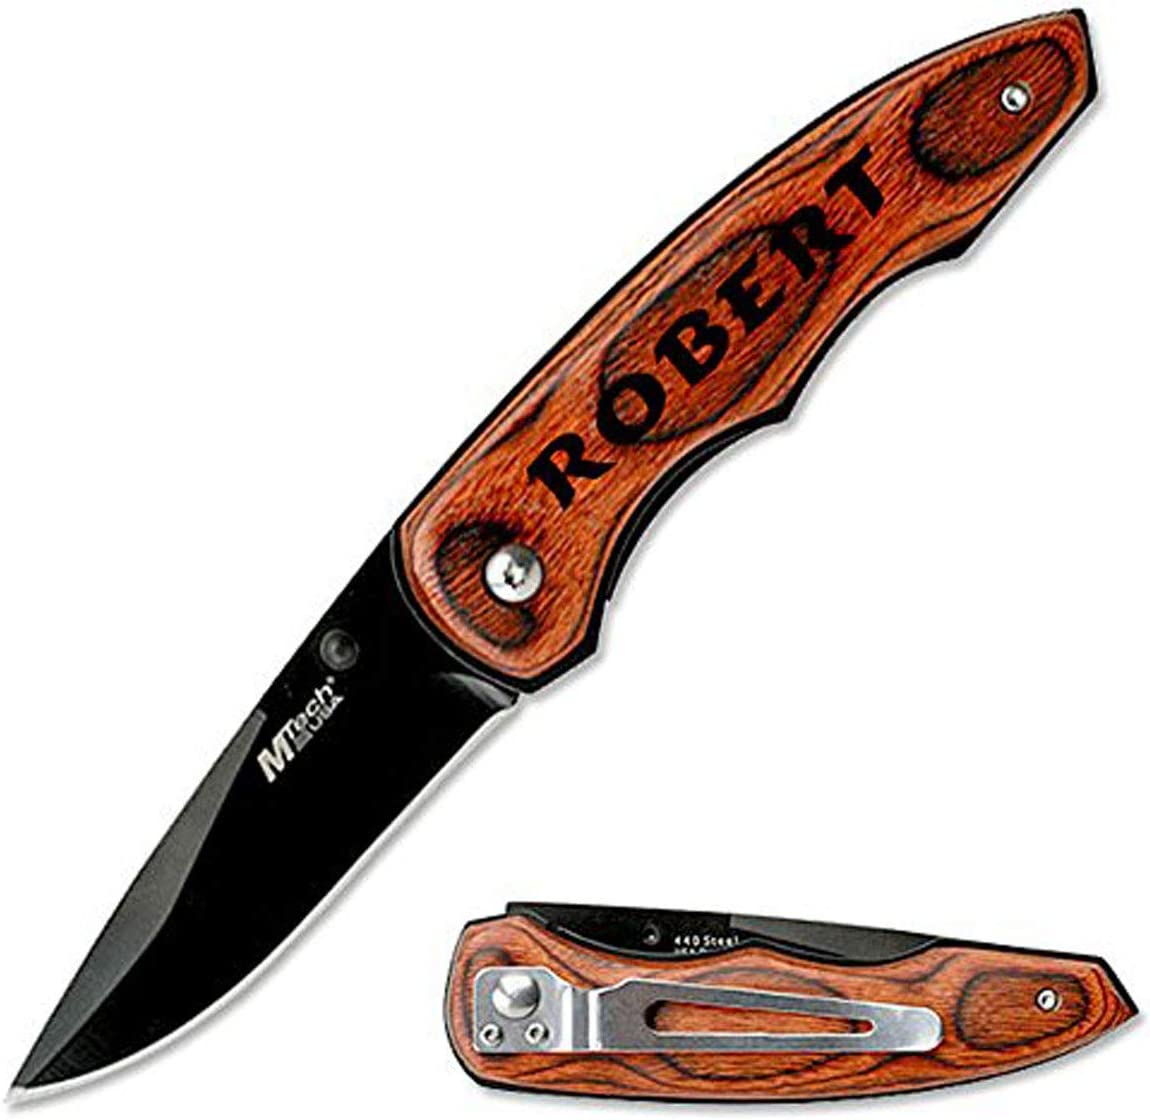 MTECH USA – Personalized Knife Pocket Knife with Free Engraving 2 - MT-407, Pack 1